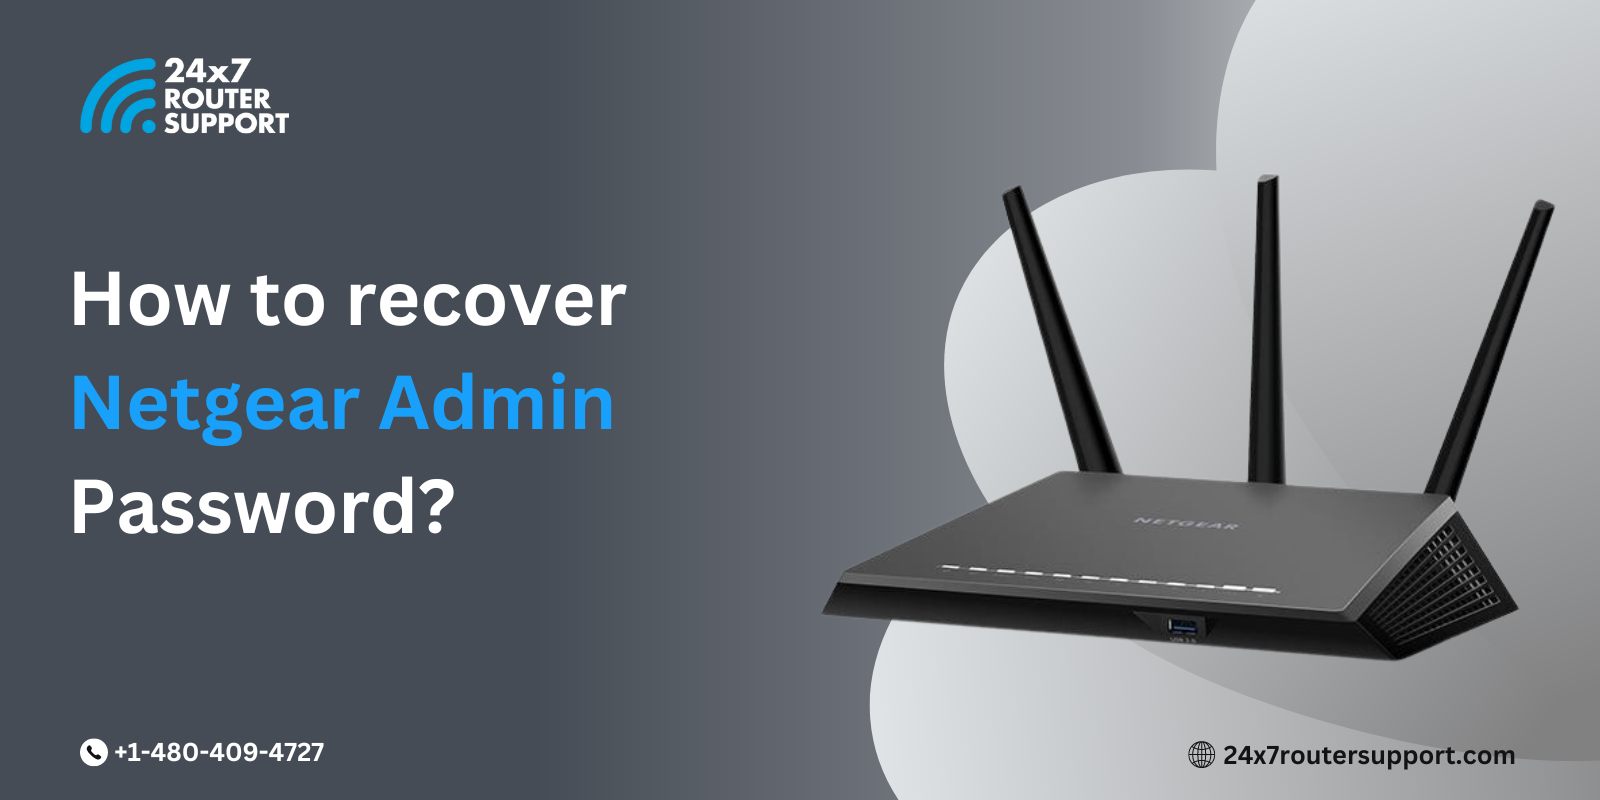 How to recover the Netgear Admin Password?